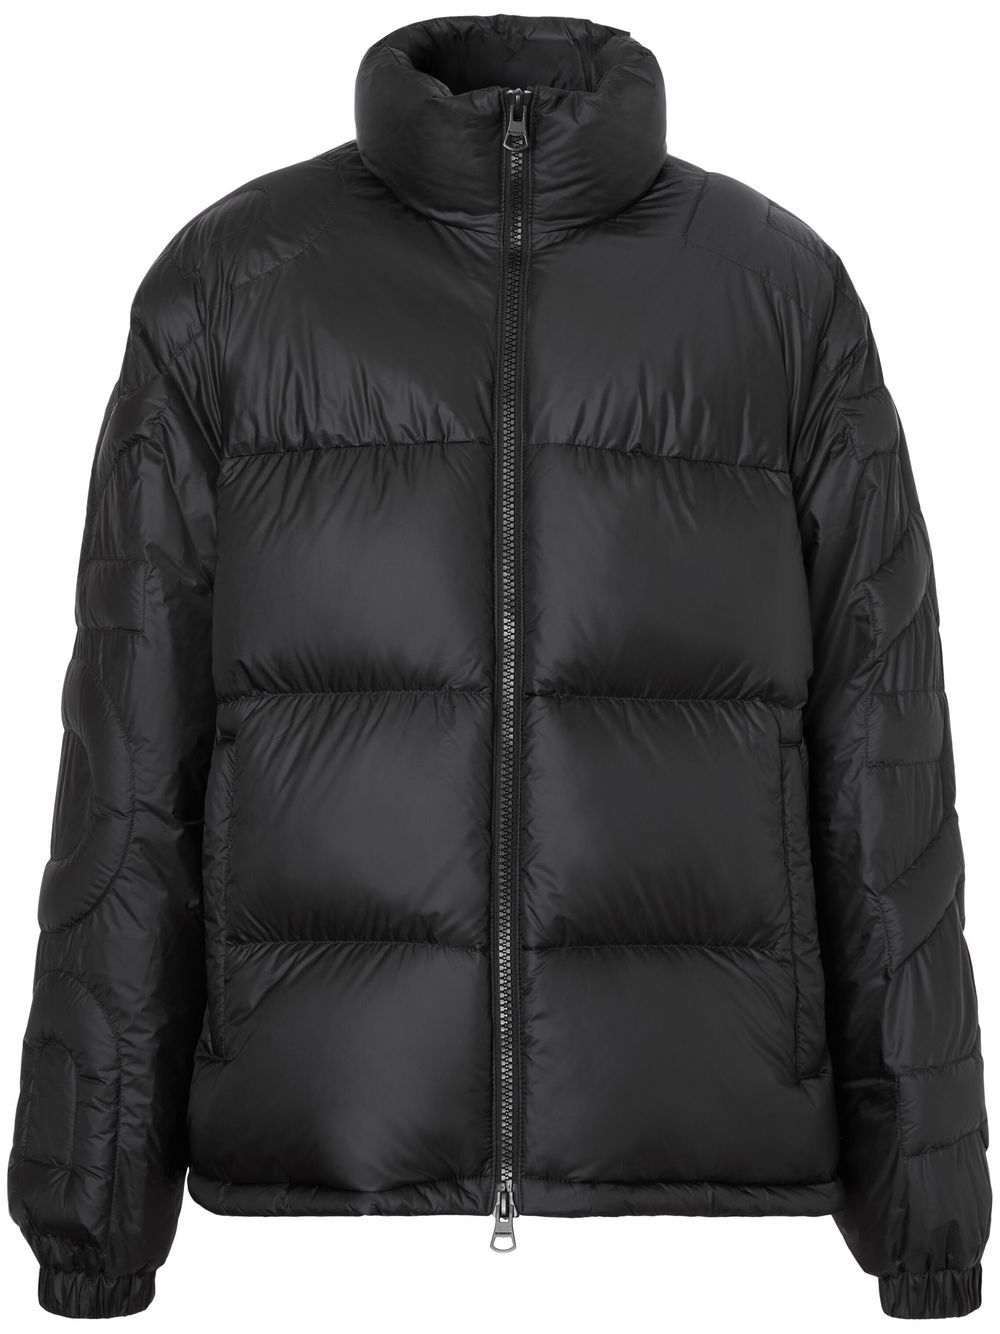 Men's Black Quilted Puffer Jacket with Burberry Logo - Size M (US)